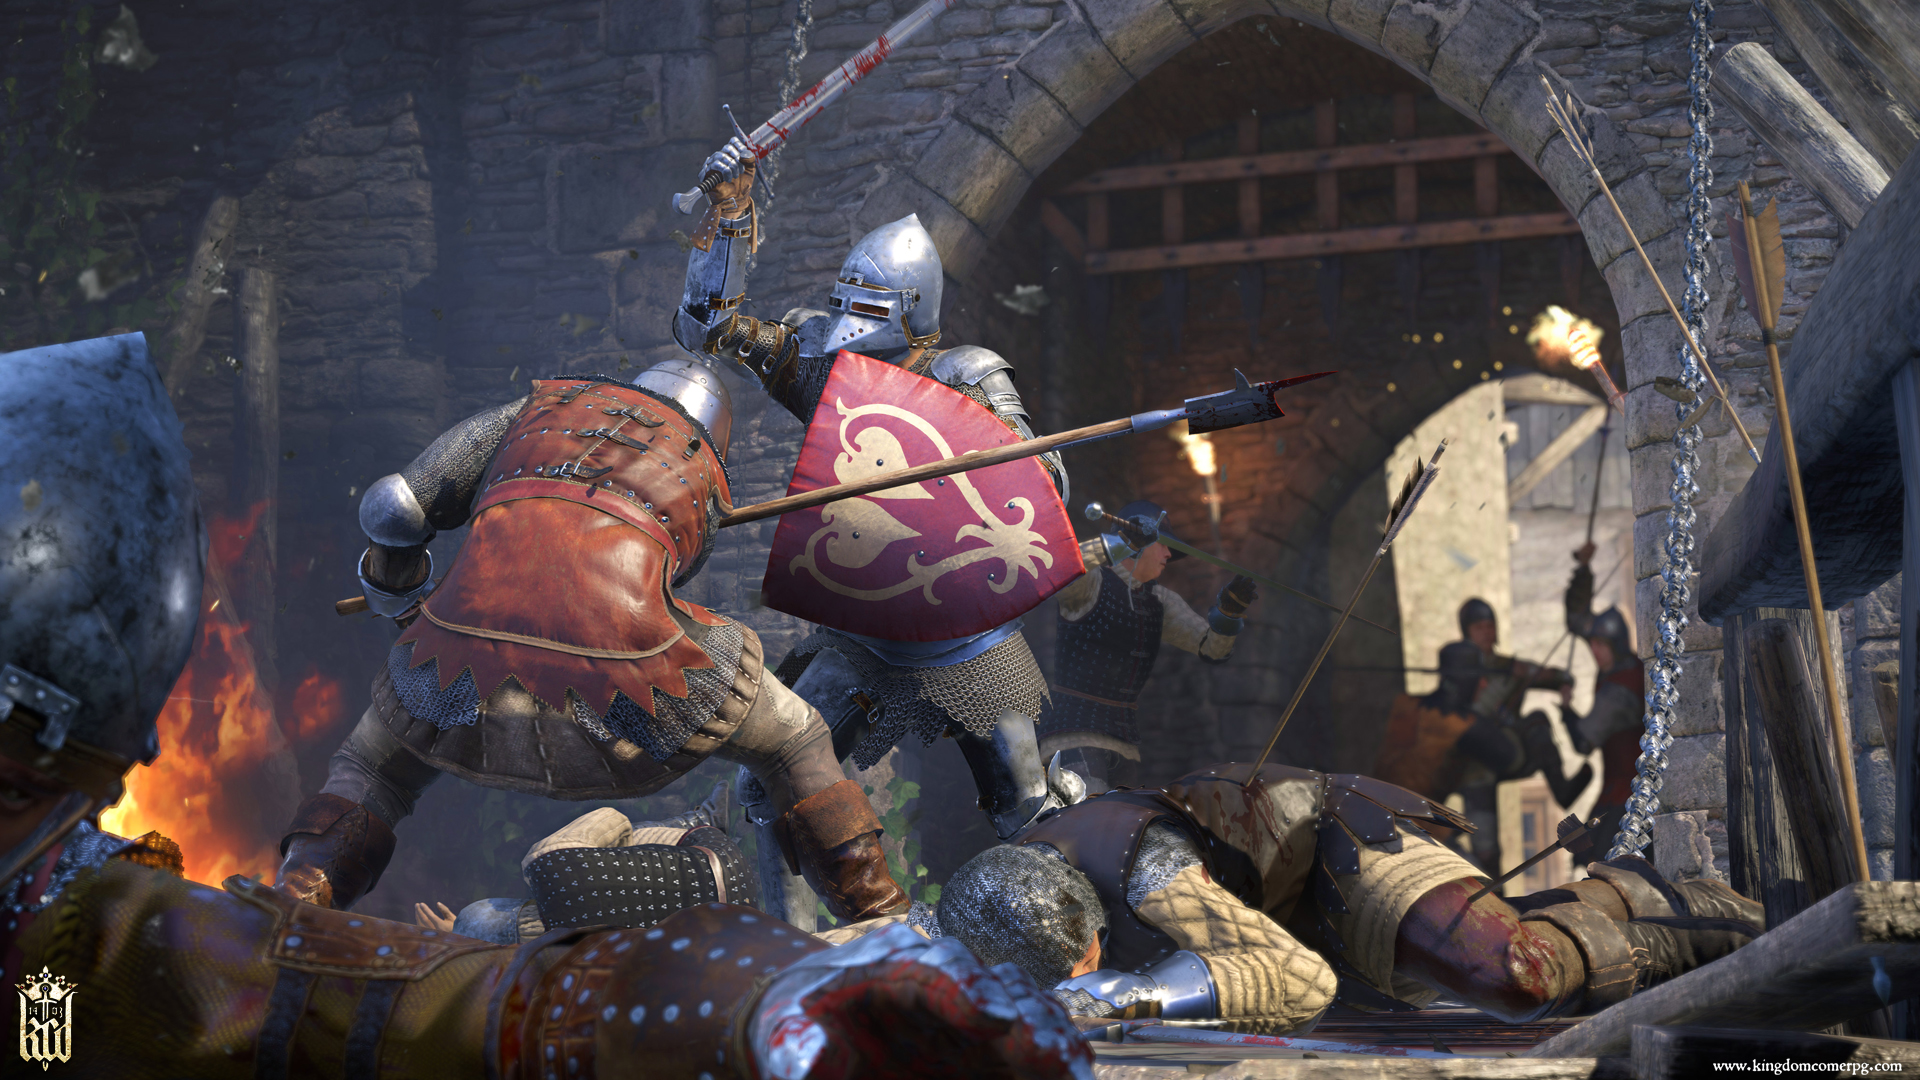 At long last, the cult classic action-RPG Kingdom Come Deliverance is releasing on Switch next month